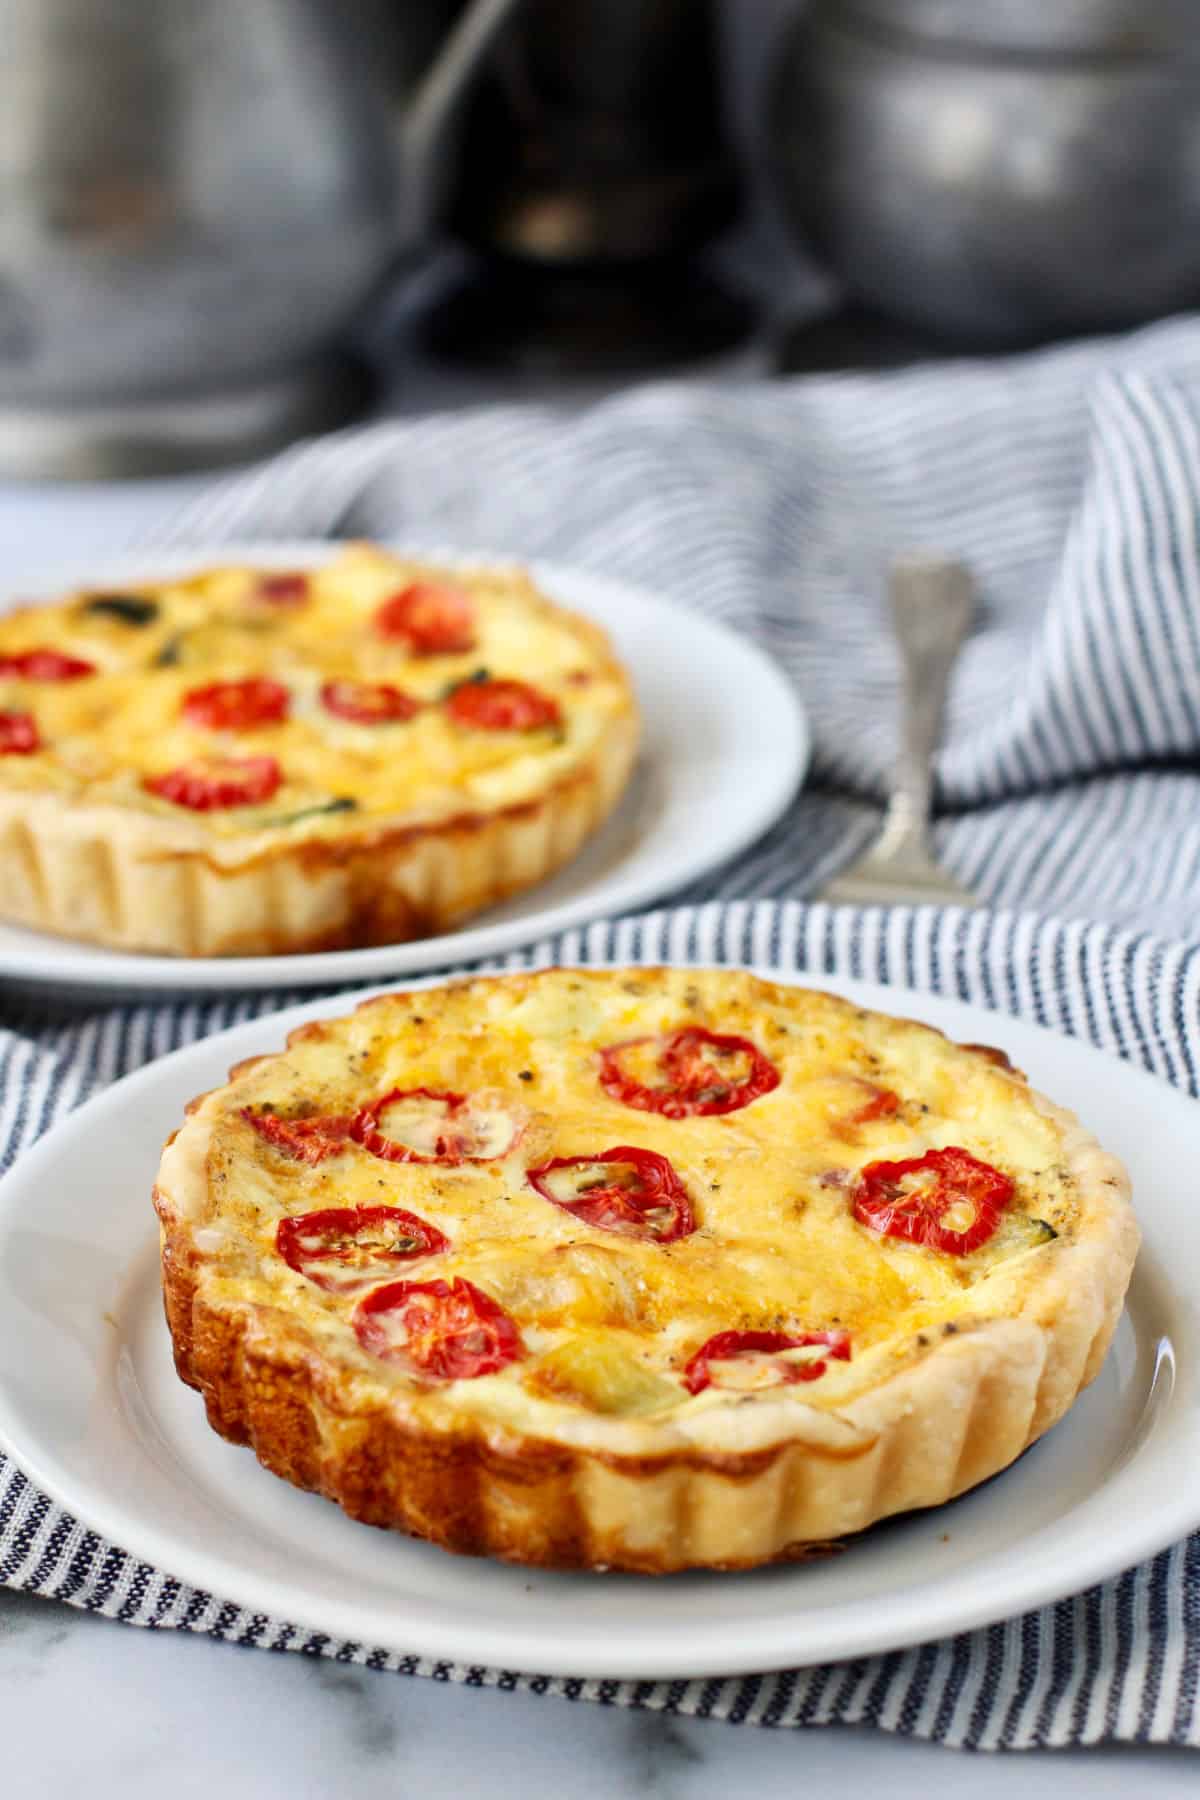 Vegetable and Cheddar Tarts on two plates.